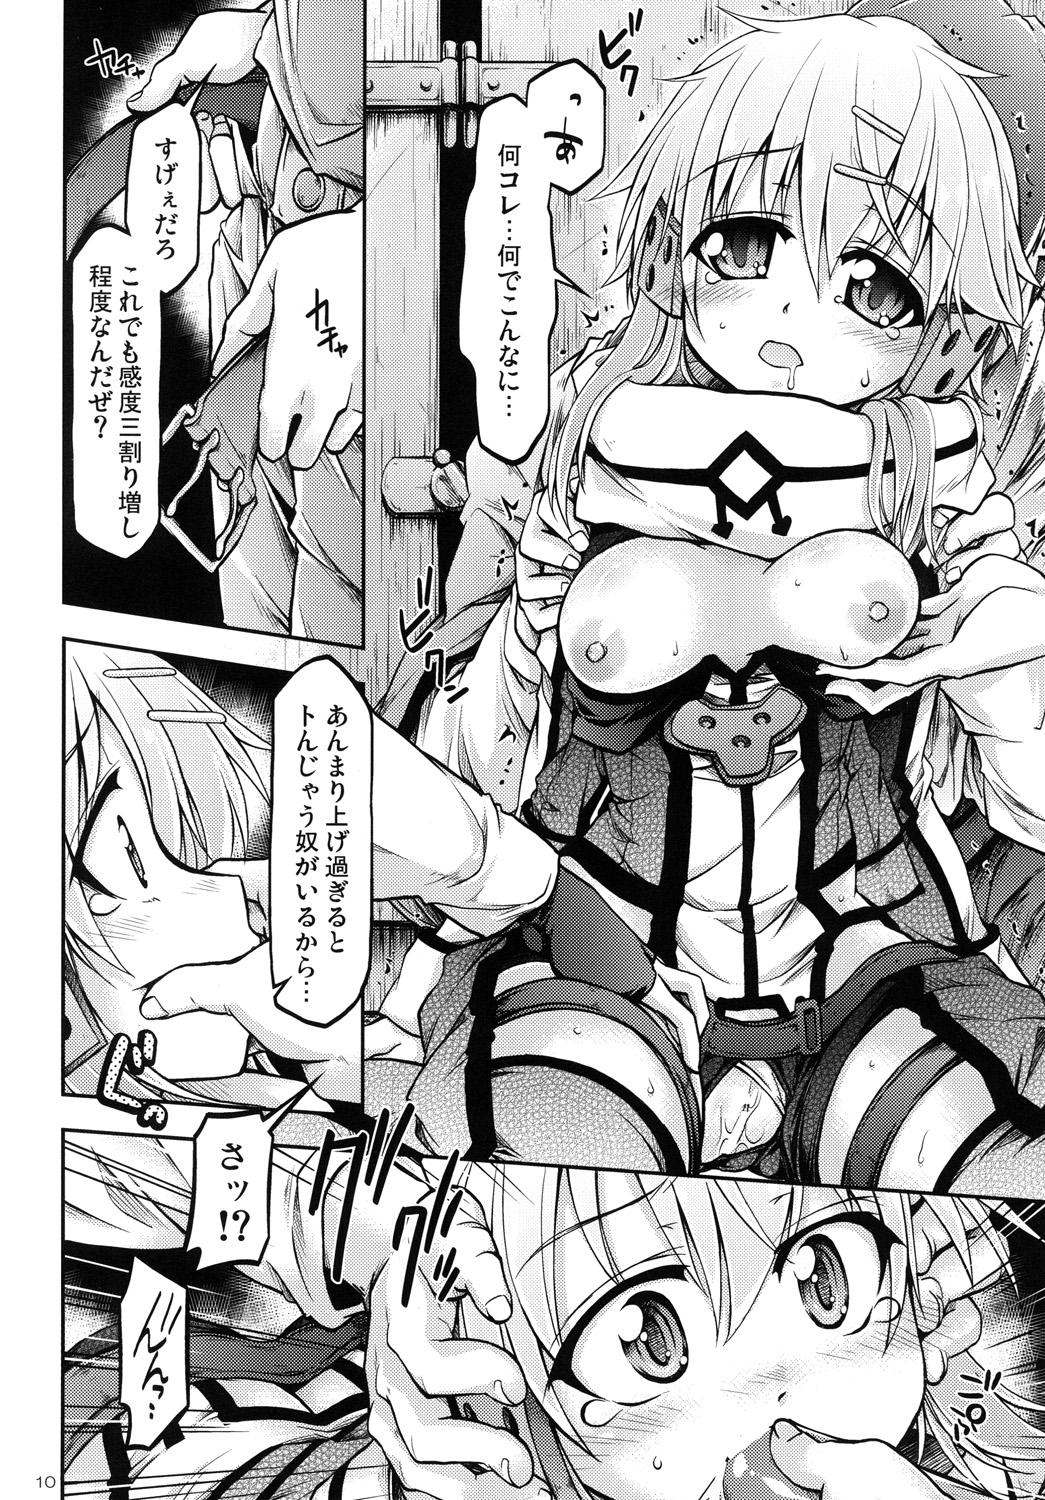 Squirting Gspot - Sword art online 3some - Page 9